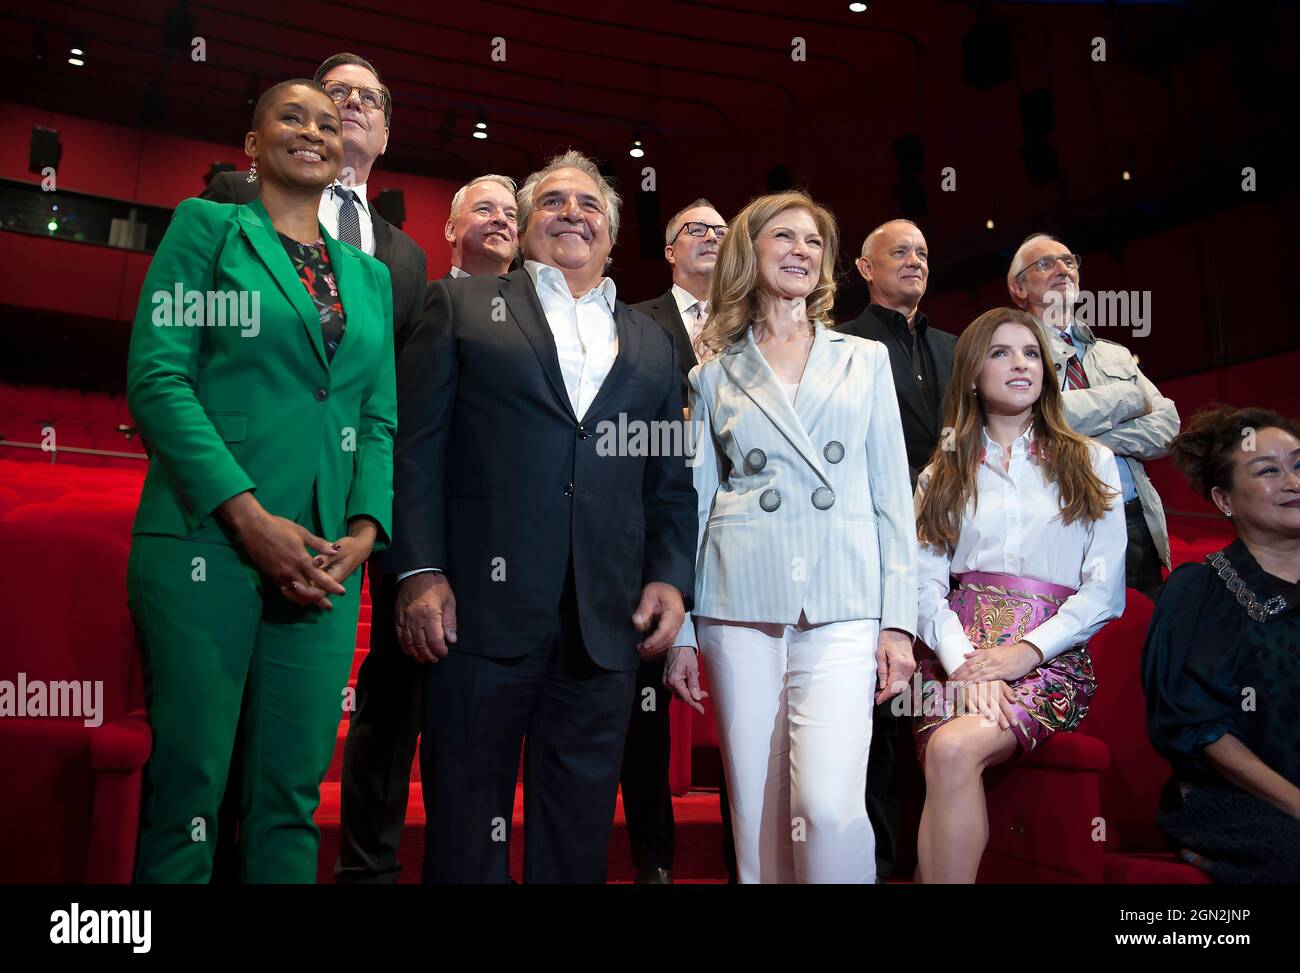 Group shot at the press opening for the Academy Museum of Motion Pictures, Los Angeles, California Stock Photo